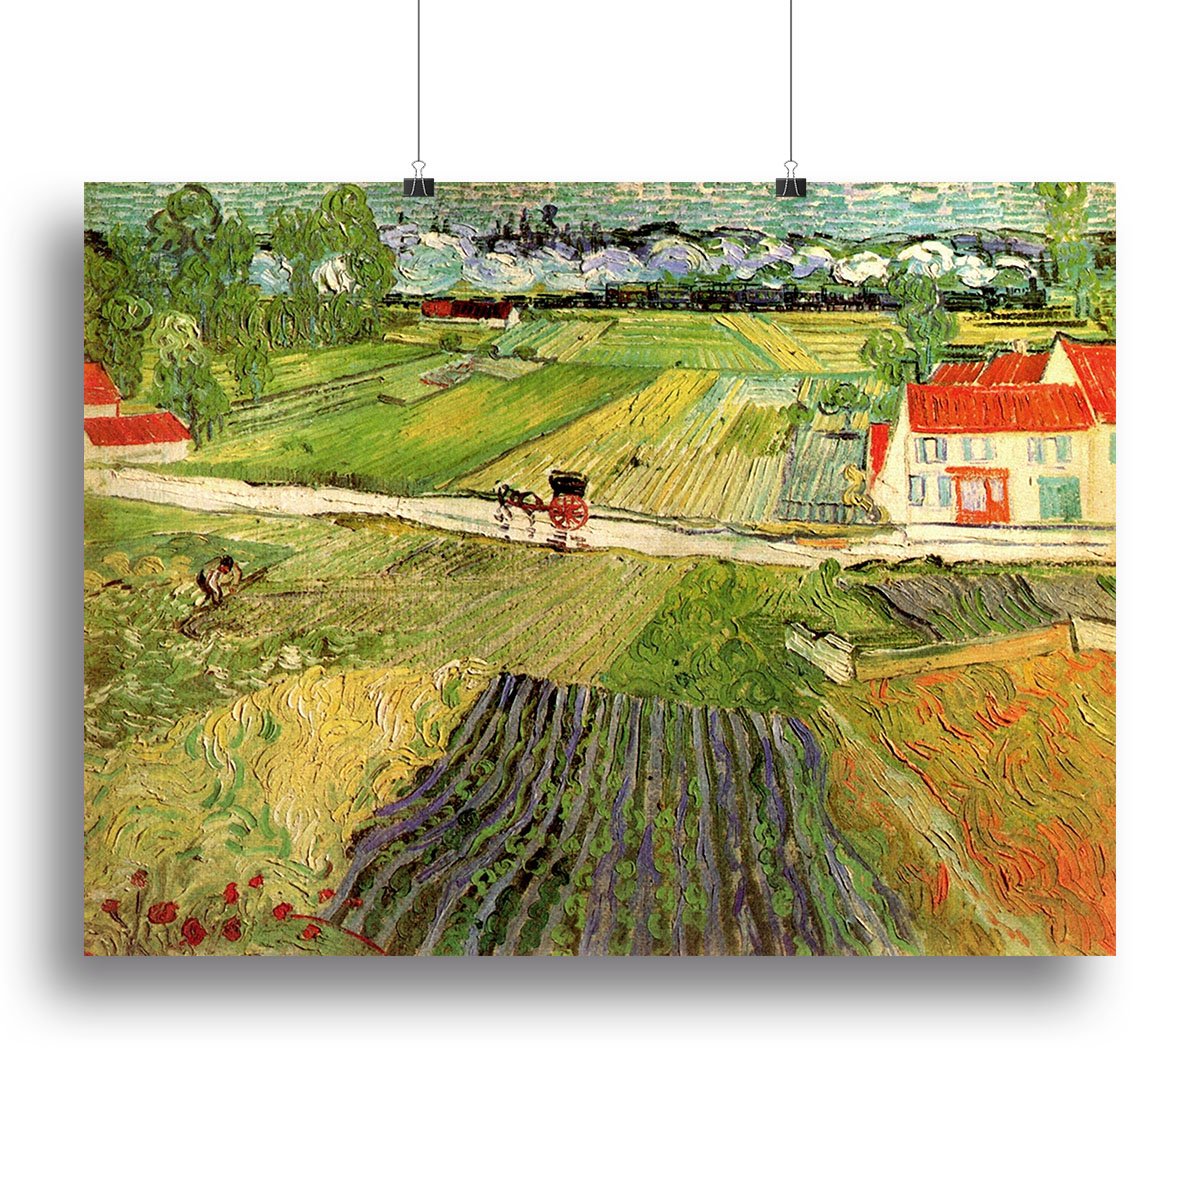 Landscape with Carriage and Train in the Background by Van Gogh Canvas Print or Poster